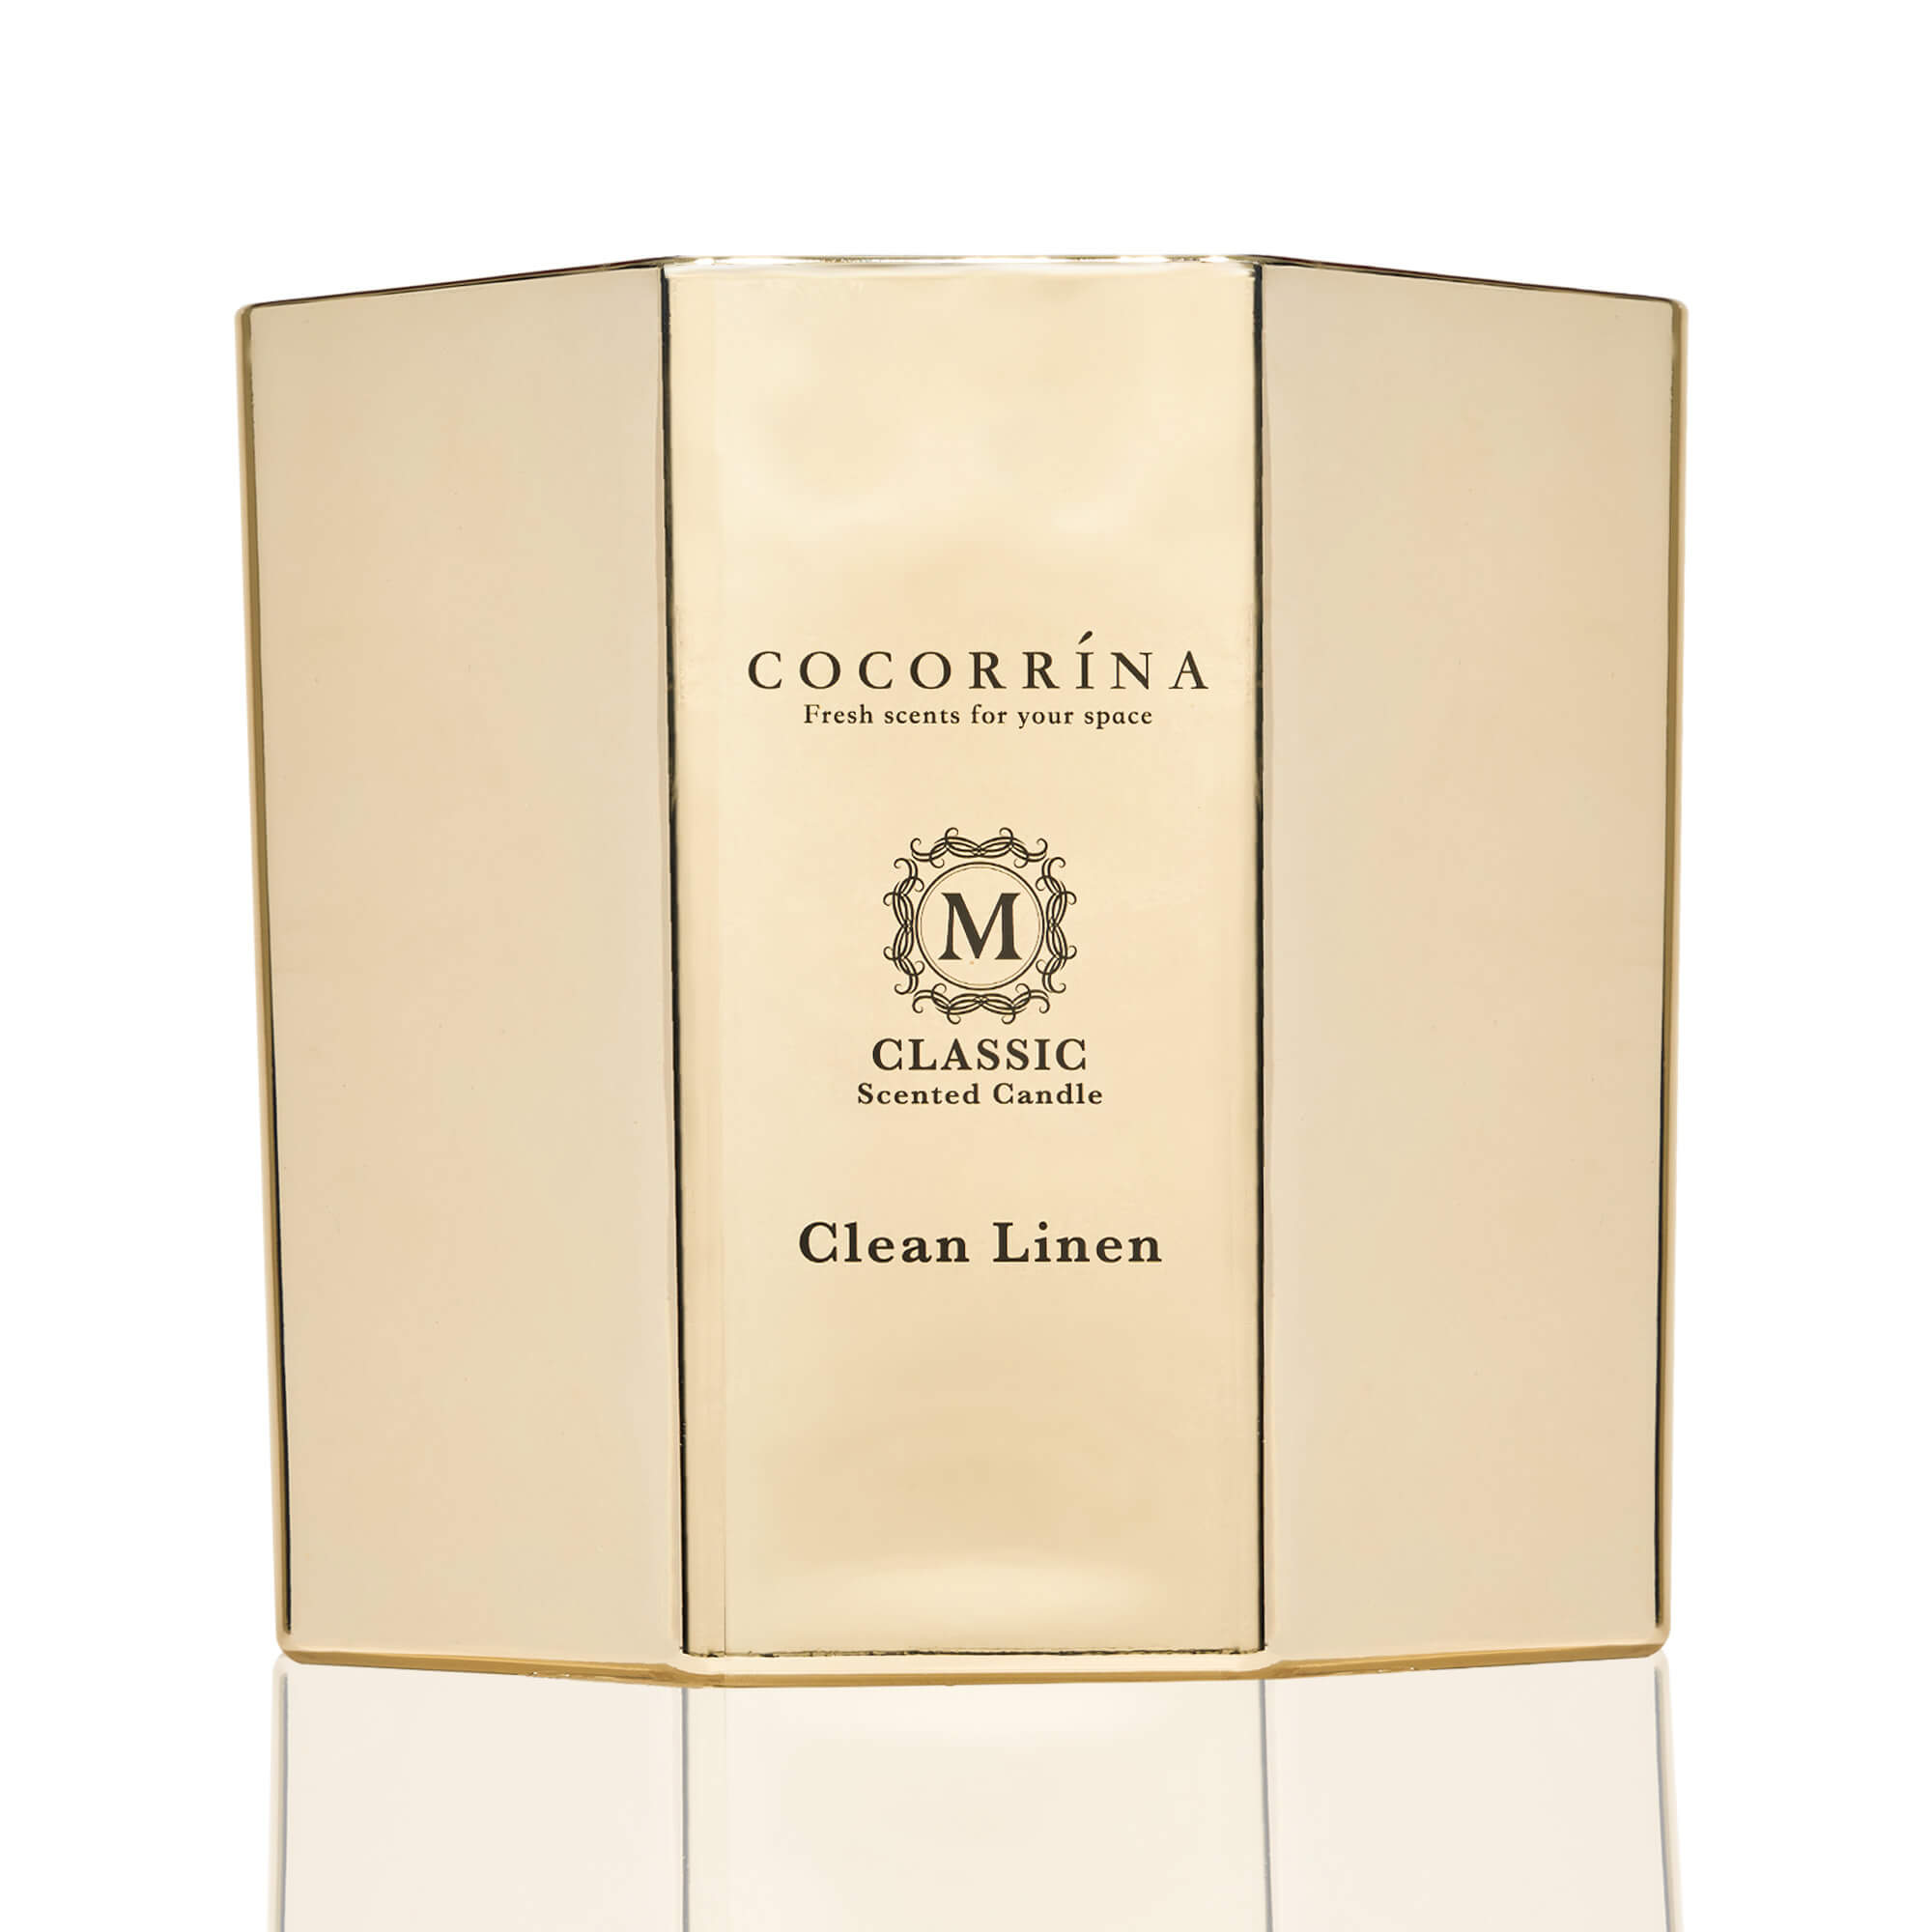 COCORRÍNA 580g Clean Linen Classica Series Candle